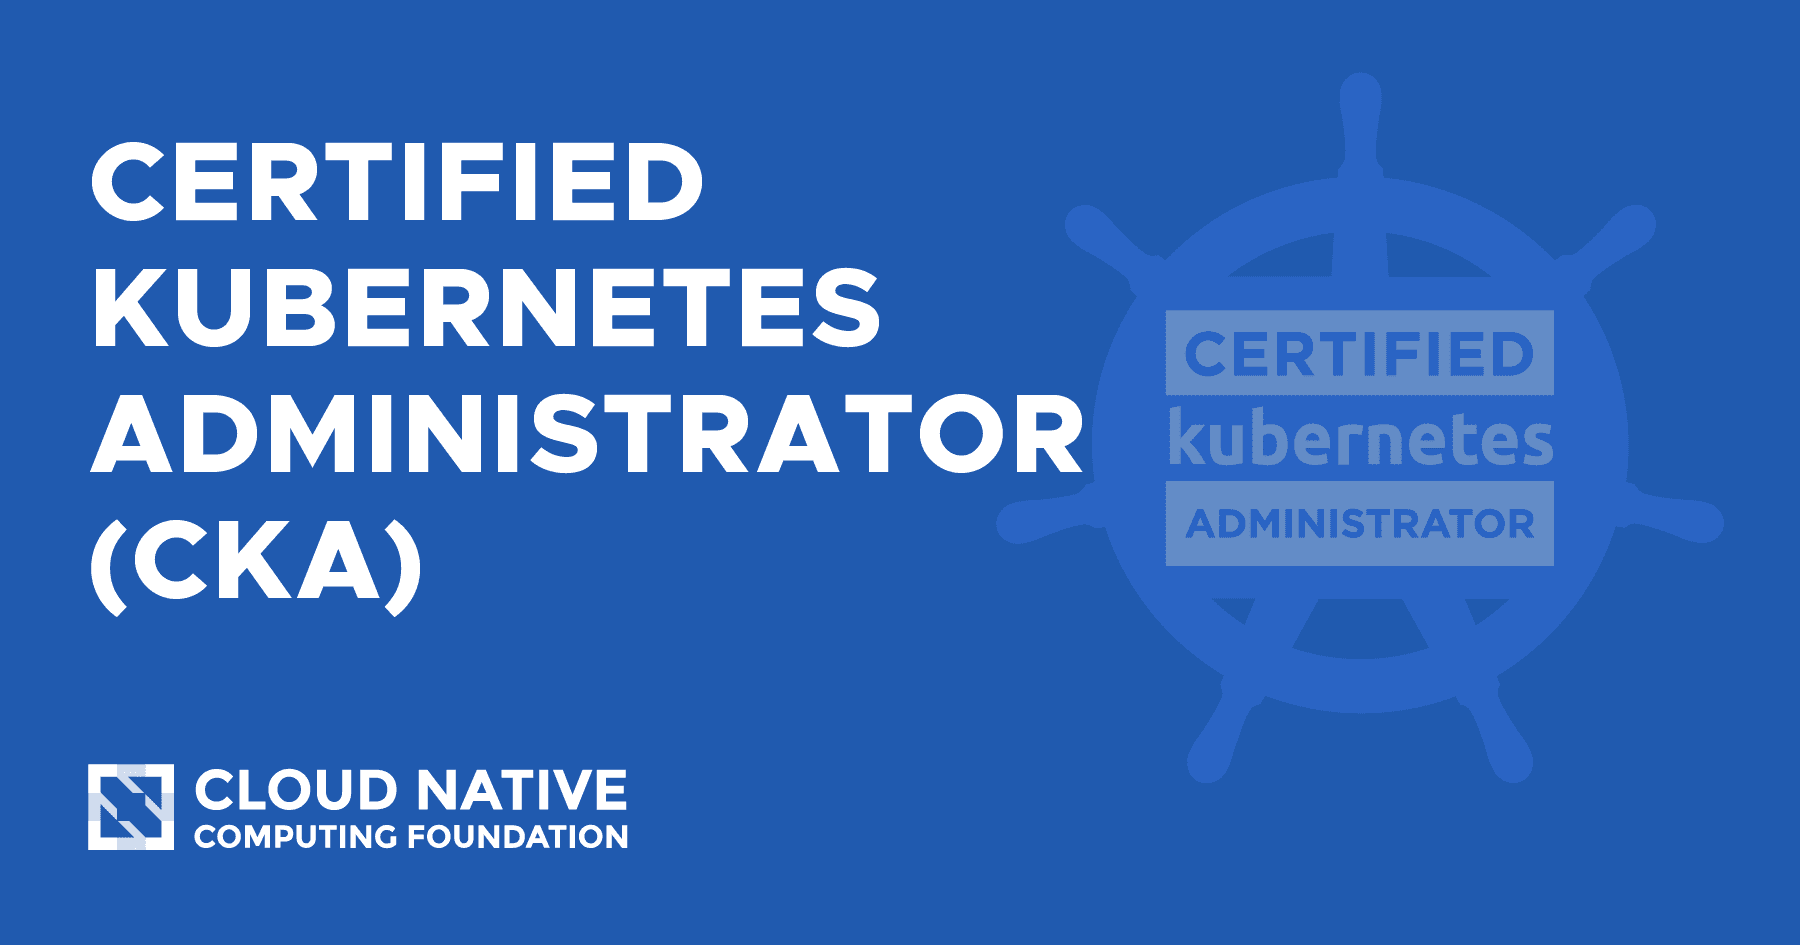 How to nail the Certified Kubernetes Administrator exam on the first attempt?